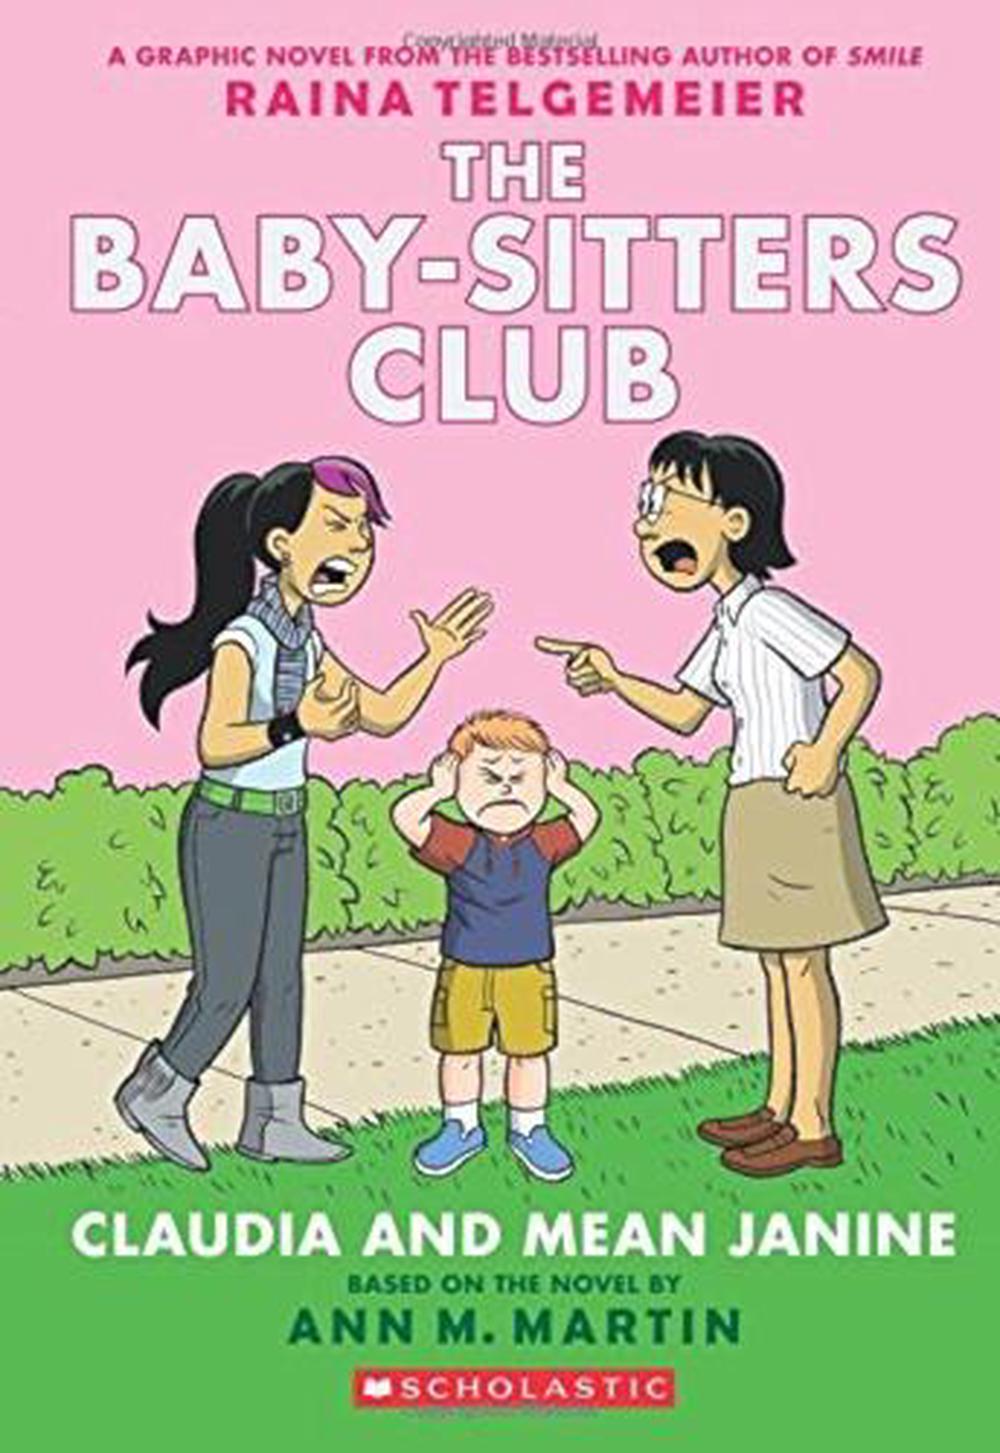 The Babysitters Club